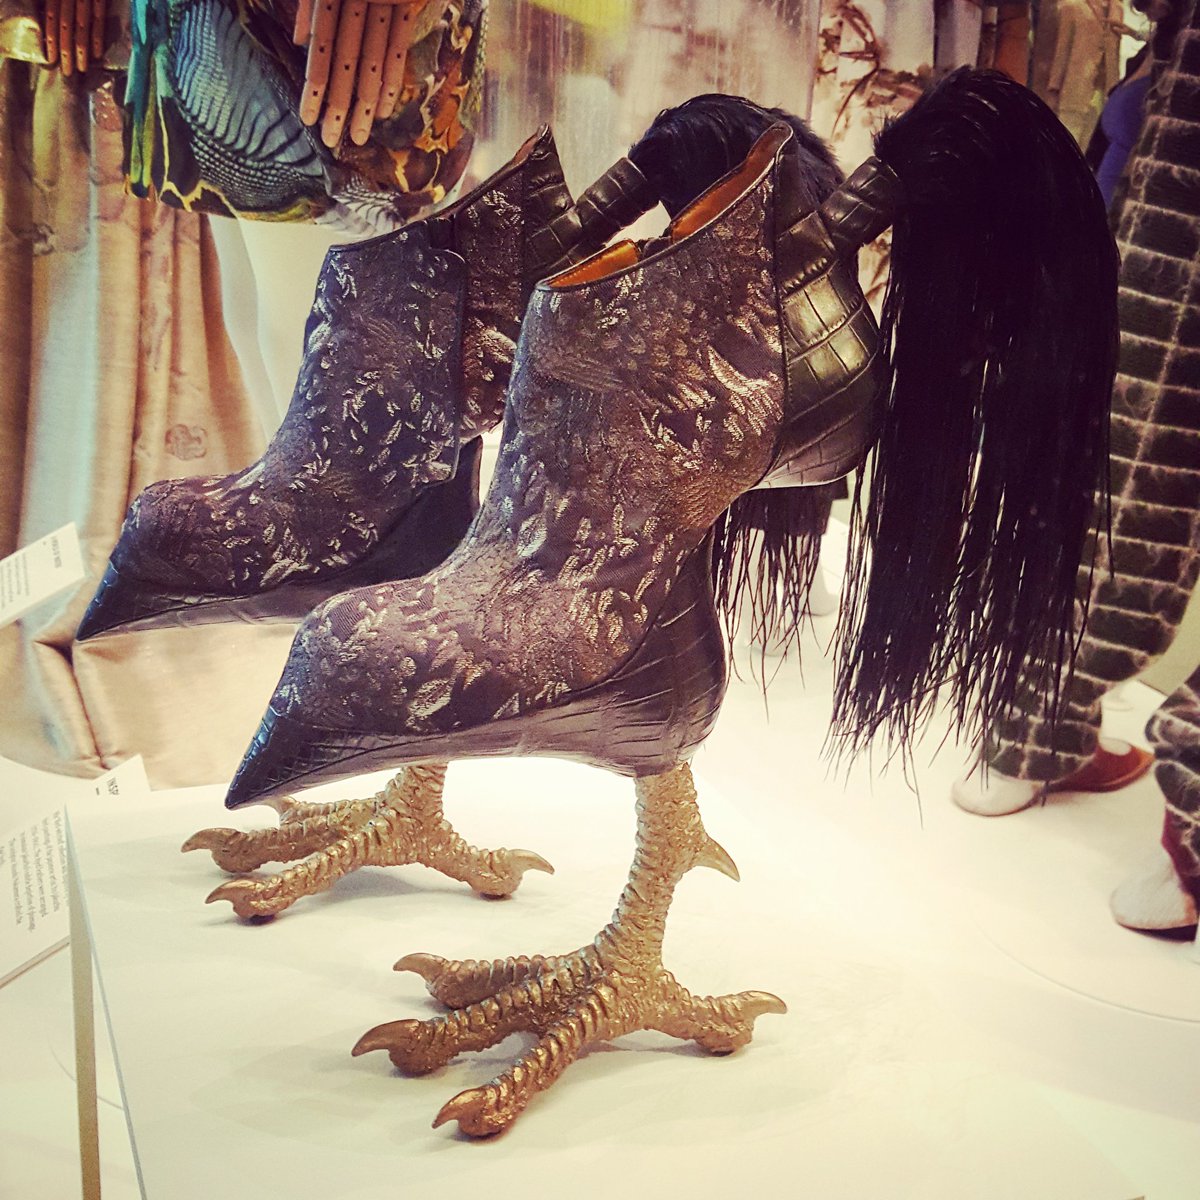 I would cheerfully wear these #shoes every day for the rest of my life. 
#fashionedfromnature #exhibition @V_and_A
#fashion #nature #fashionedfromnatureexhibition #victoriaandalbertmuseum #victoriaandalbert #museum #London #birds #feet #show #couture #designer #vamuseum #vam